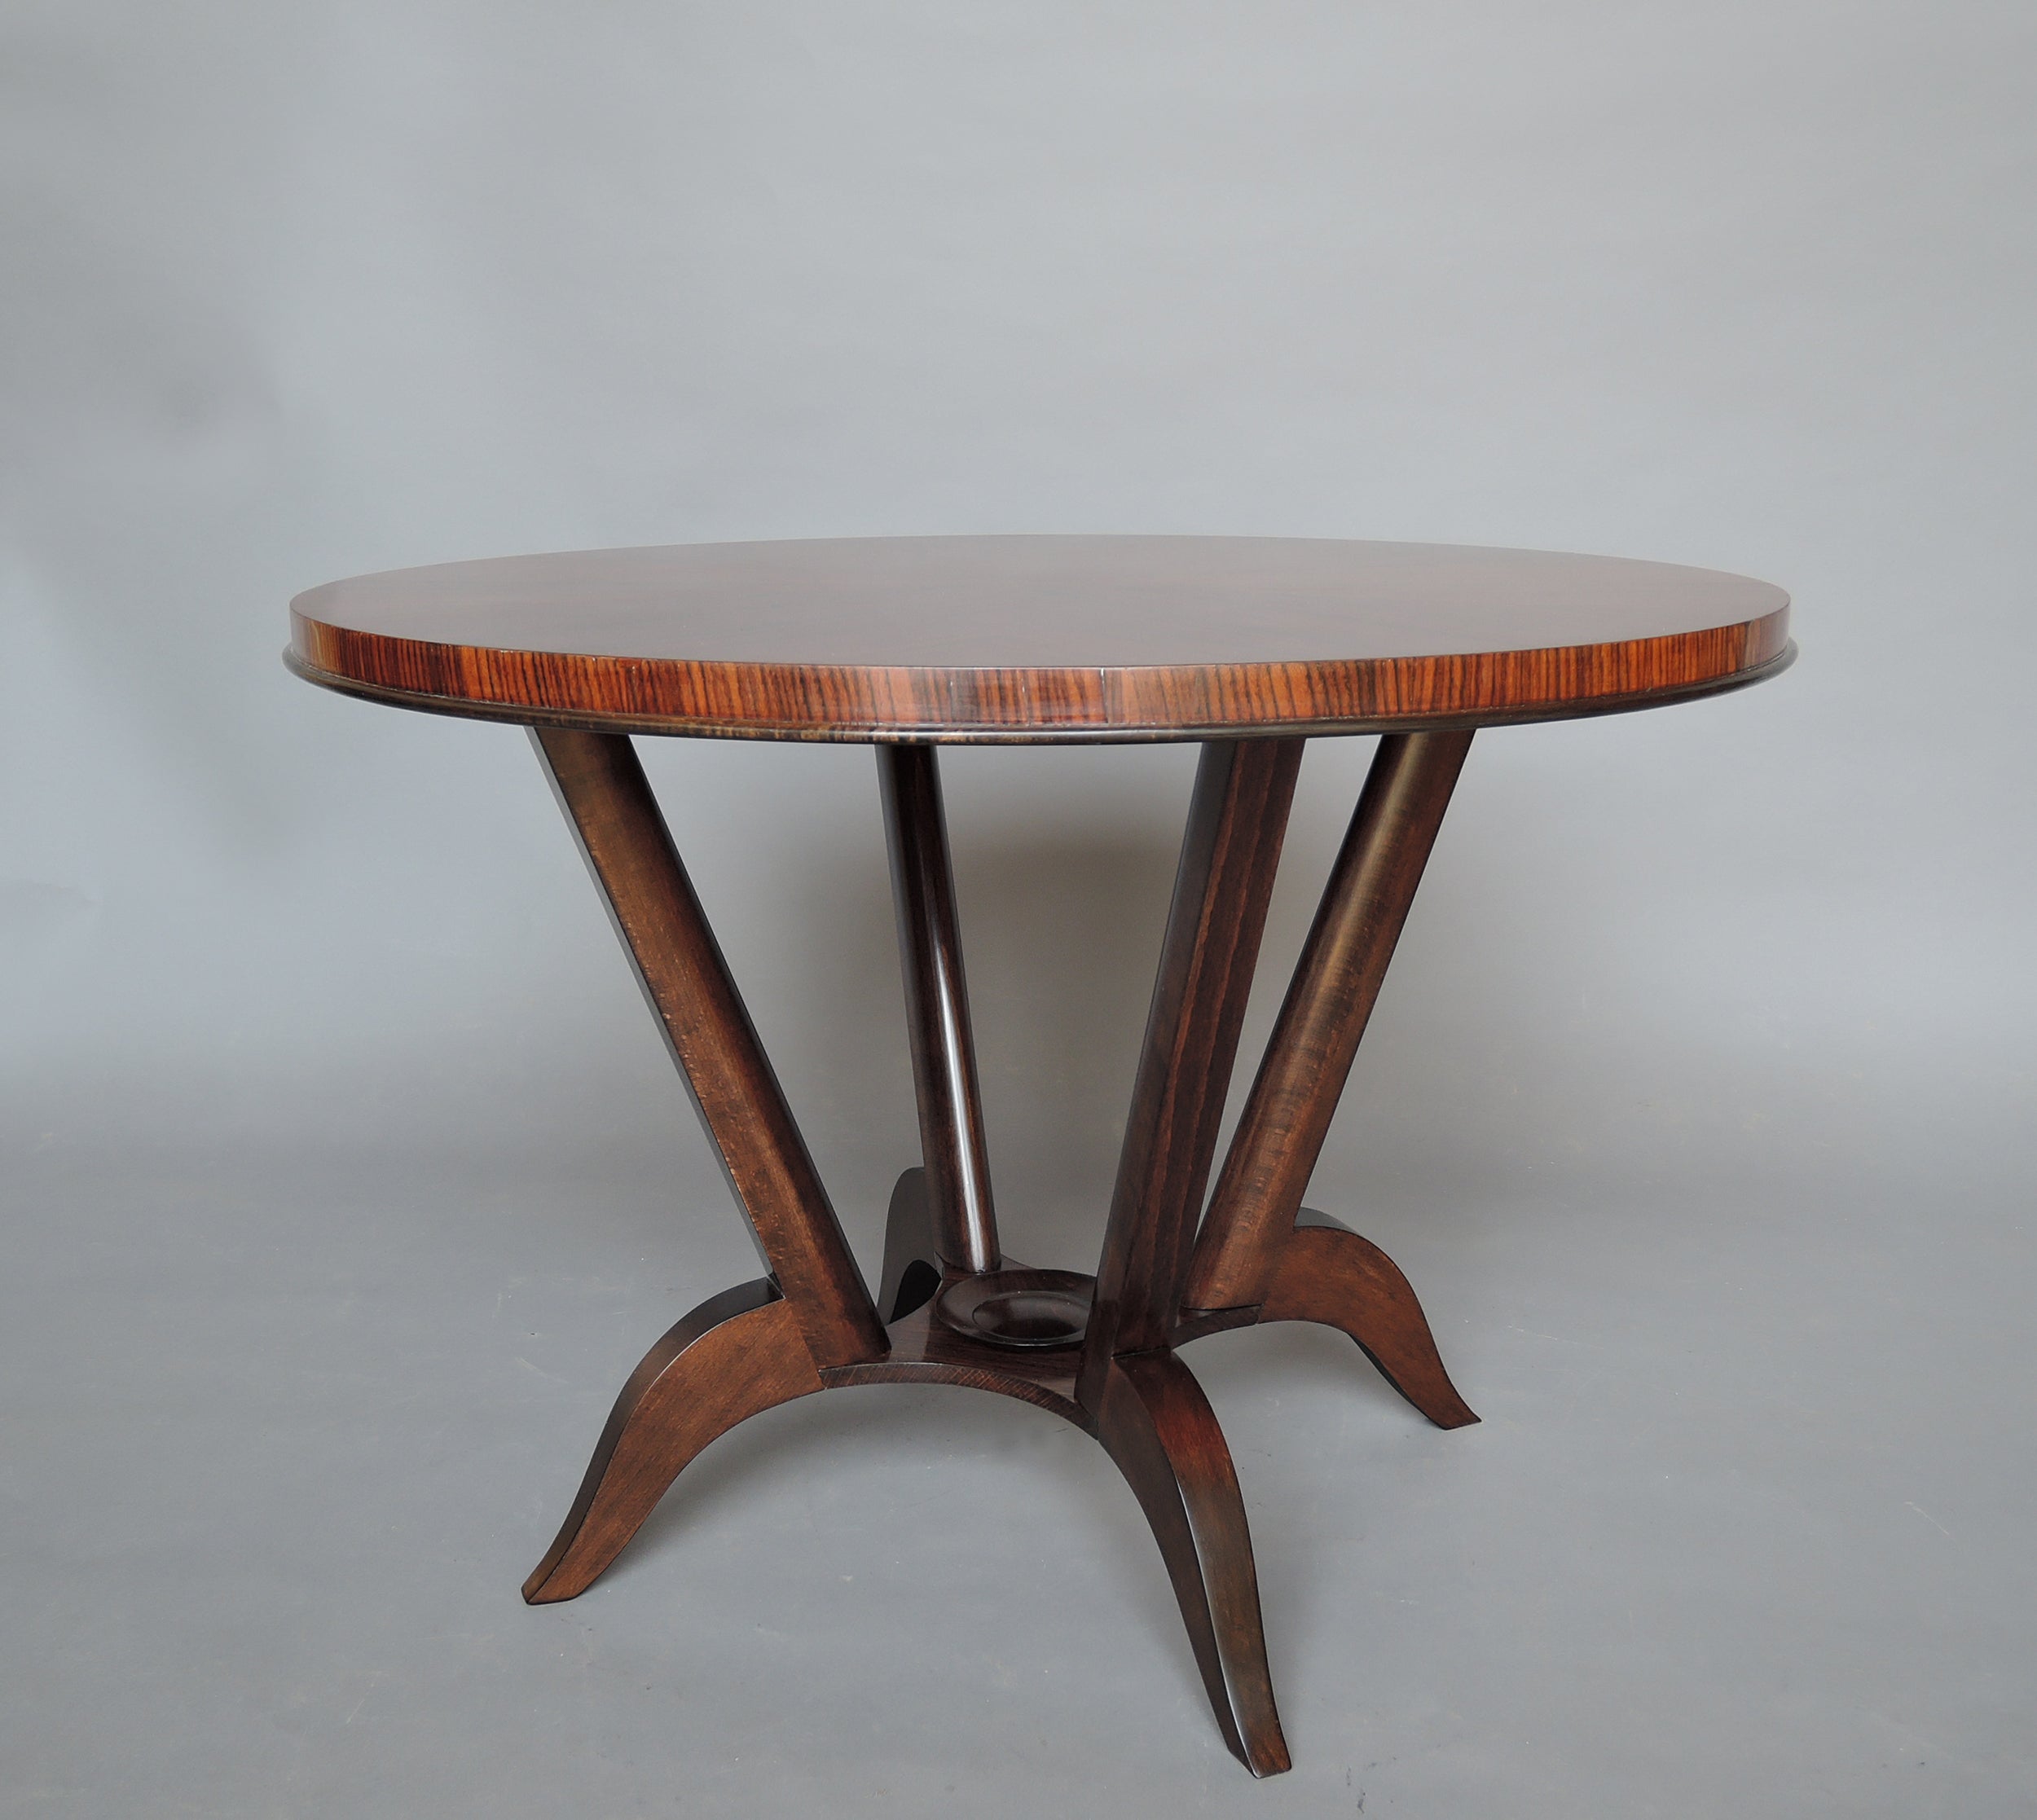 French Art Deco Rosewood Gueridon with a Four Curved-Leg Pedestal In Good Condition For Sale In Long Island City, NY